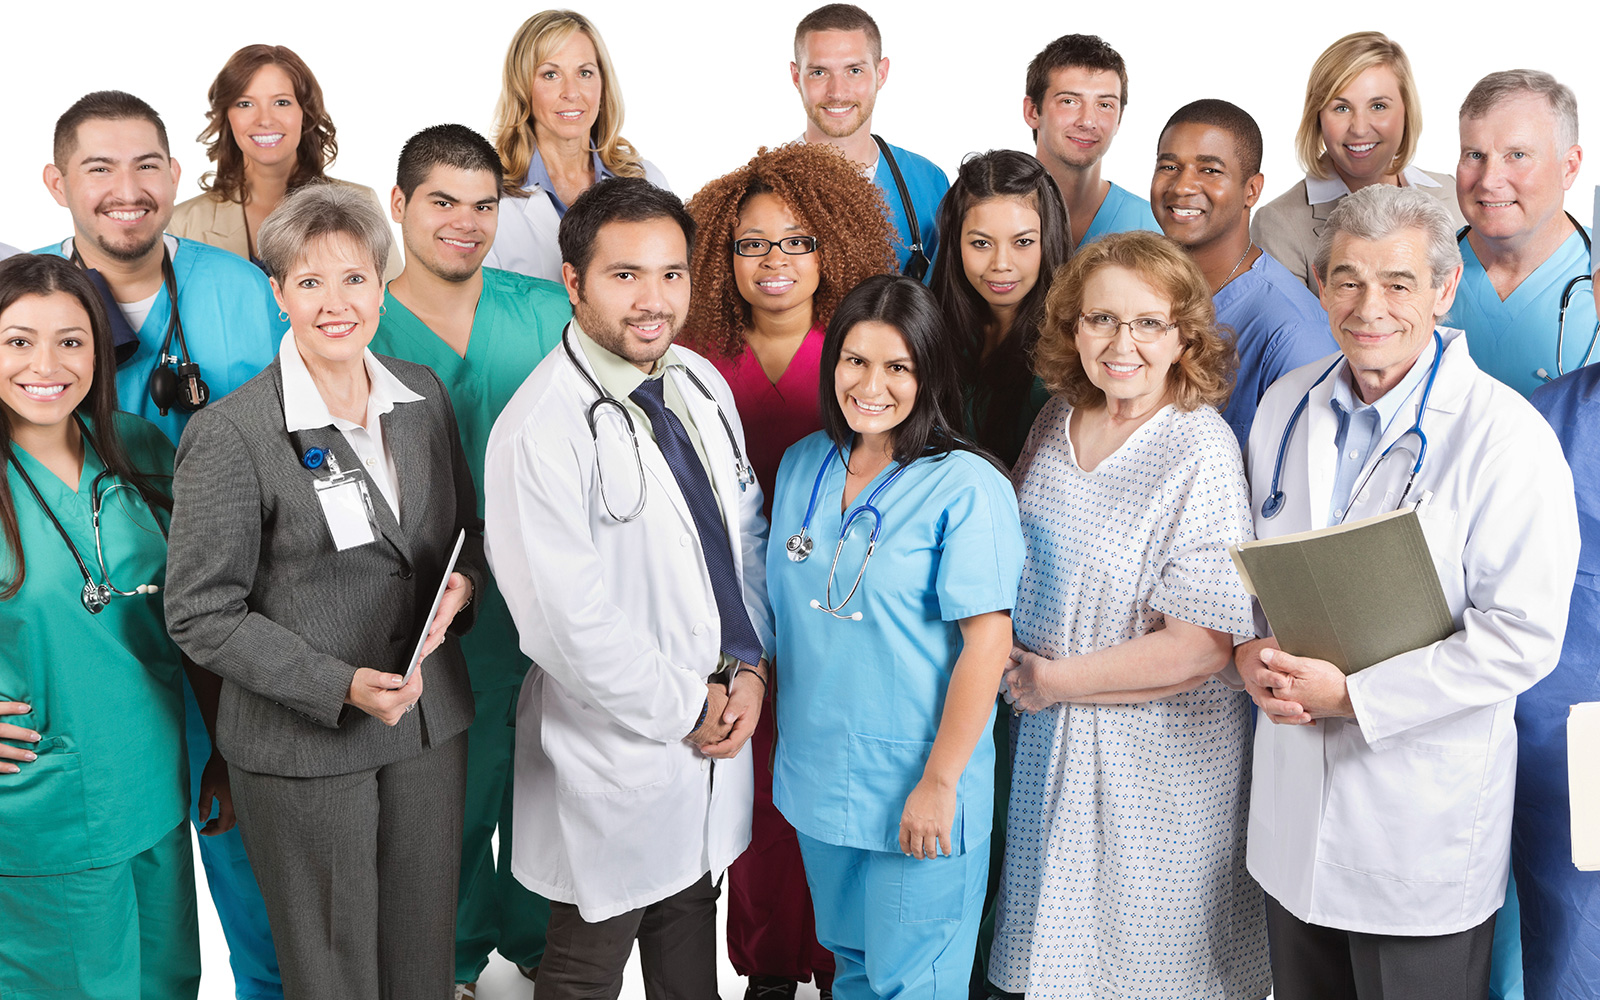 Over a dozen diverse smiling hospital staff and a patient standing together, all looking at the camera. 